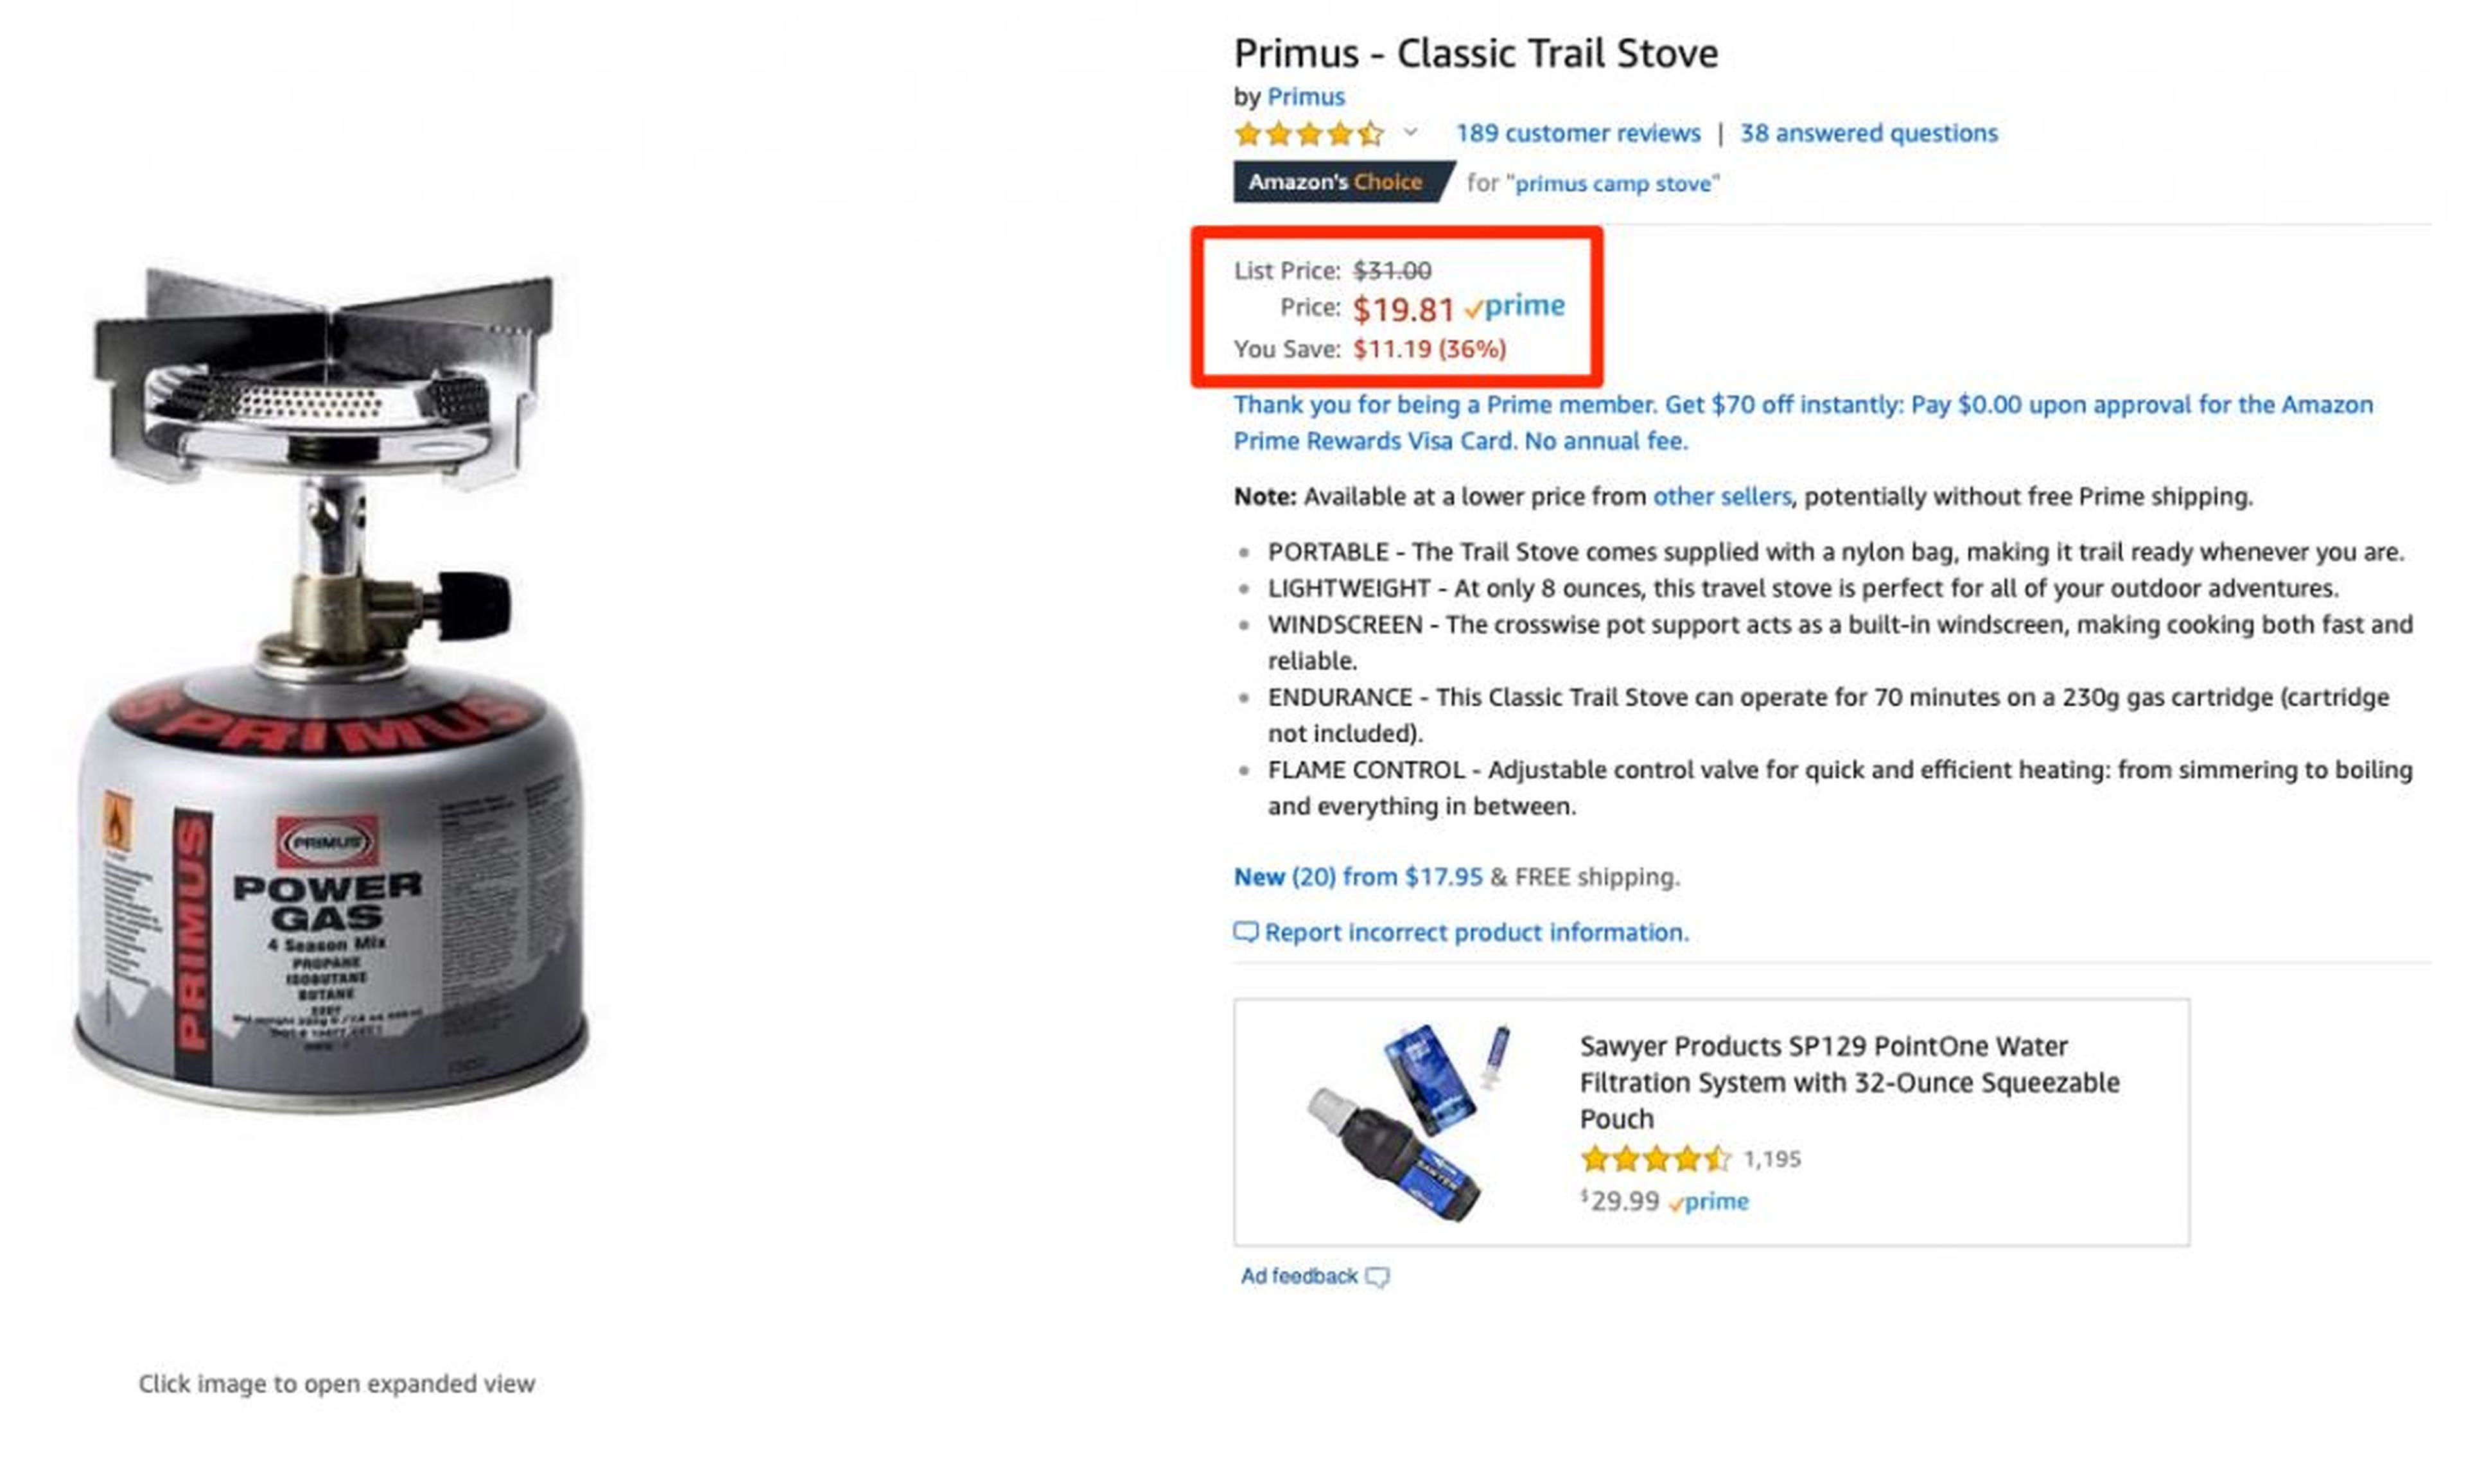 Amazon prices fluctuate often, which can create odd prices (that may save you money).